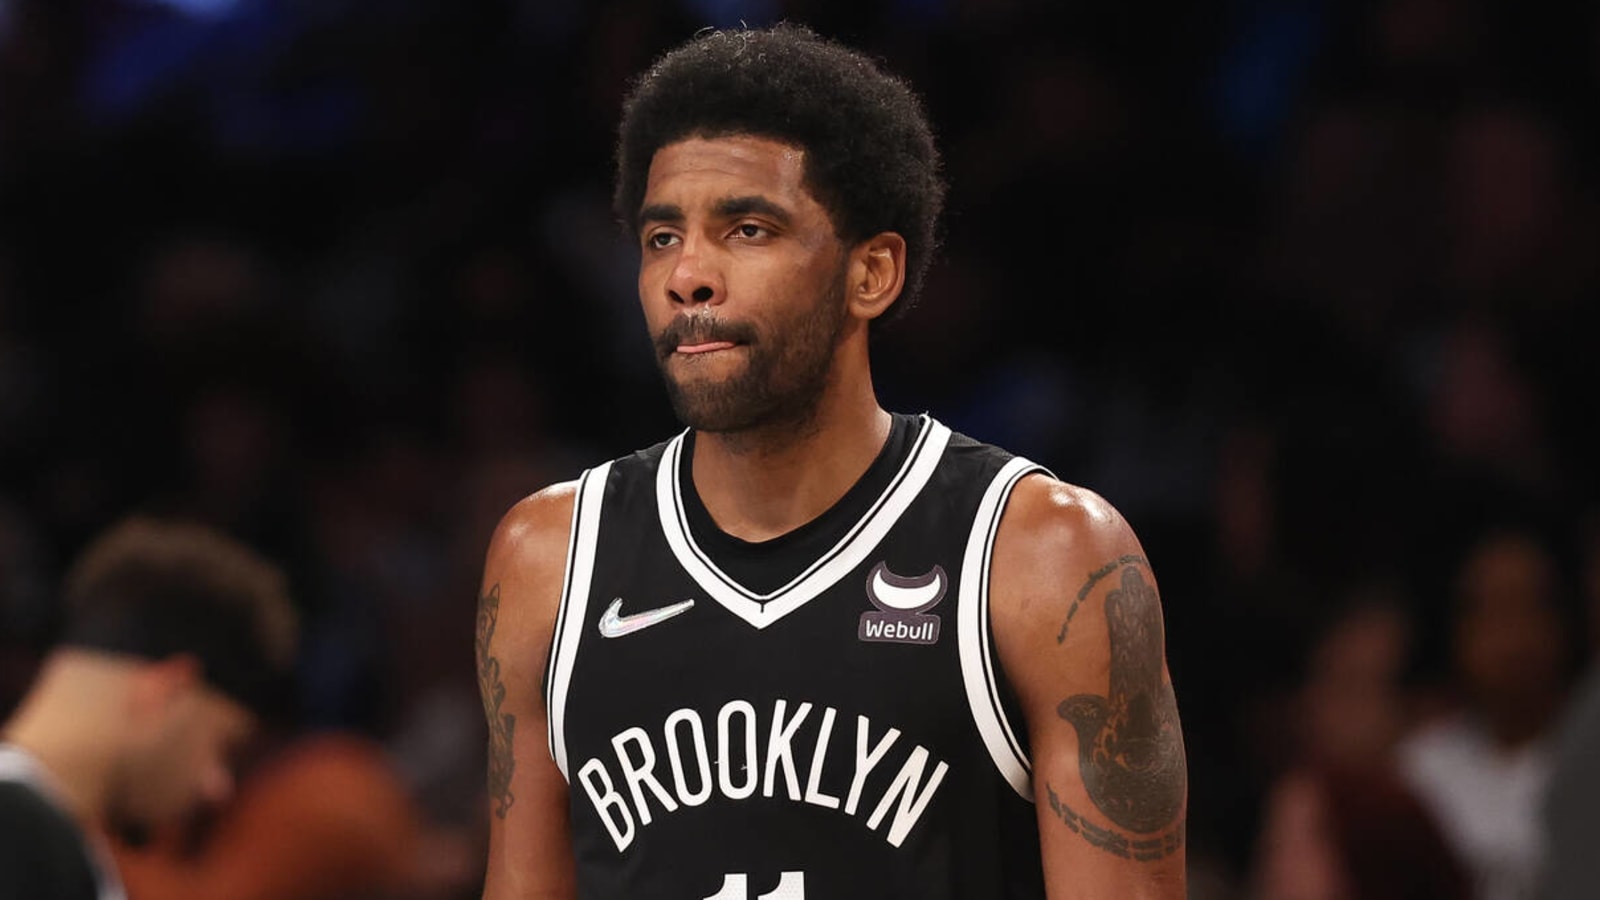 Kyrie Irving roasted for comment after Nets’ loss